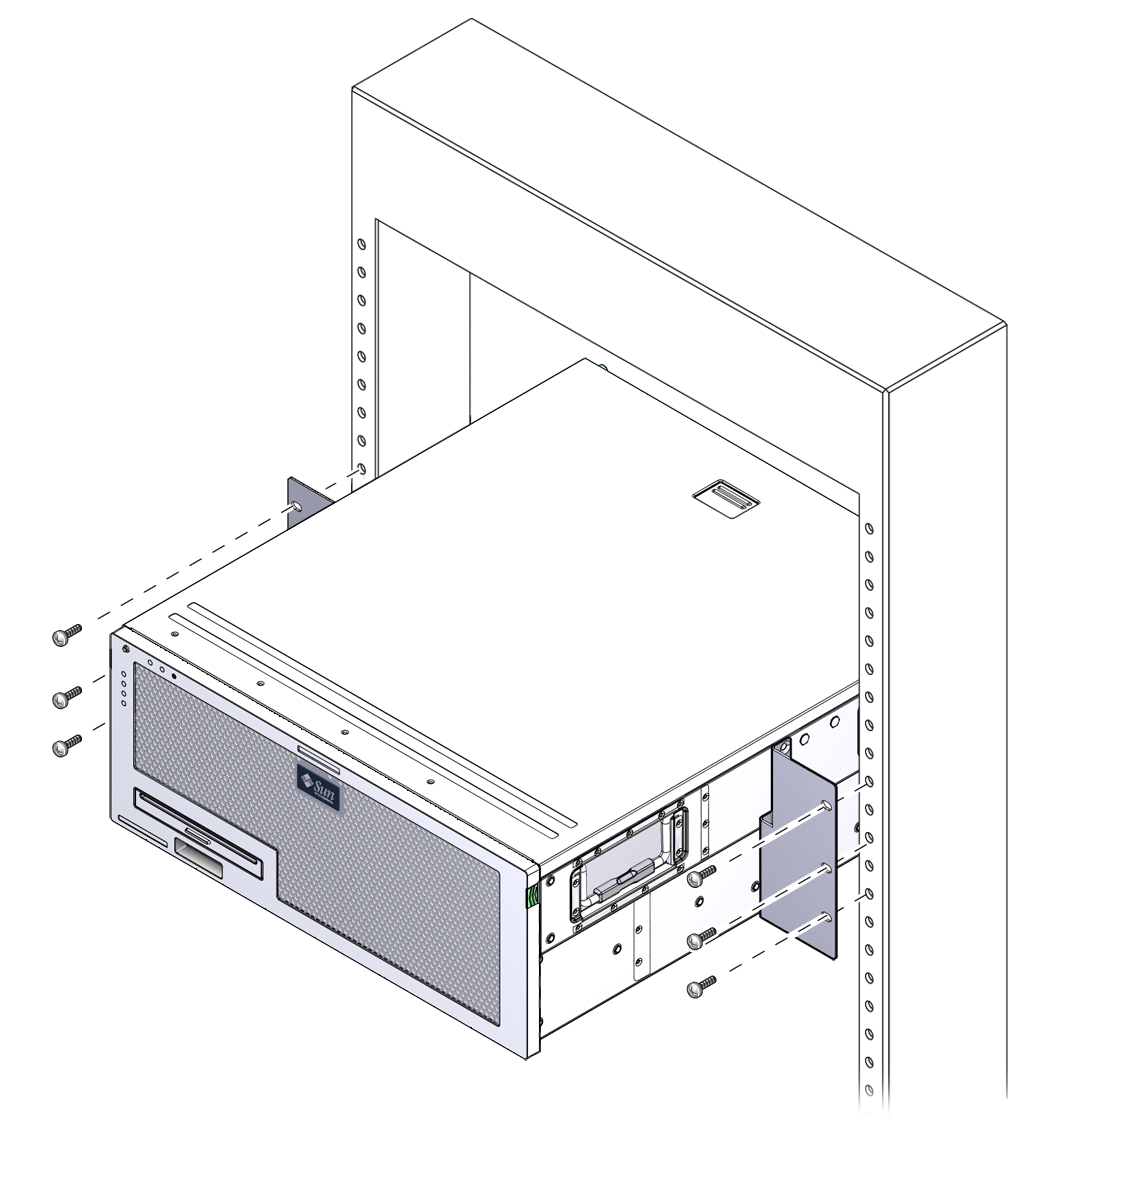 Figure showing how to secure the hardmount
brackets to the front of the rack.